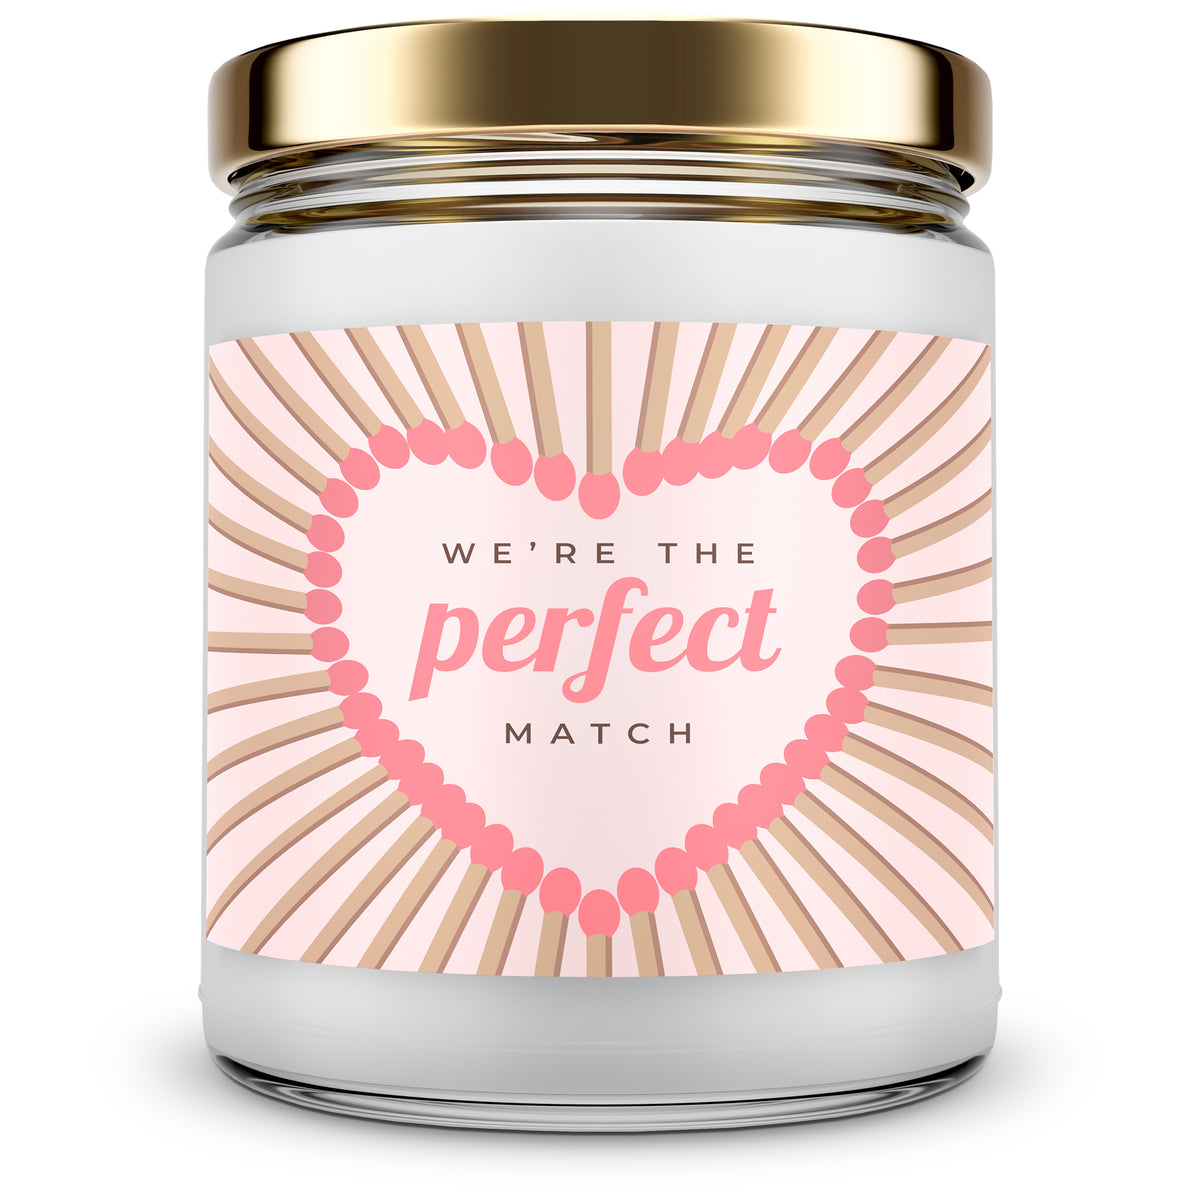 We're the Perfect Match. - Mint Sugar Candle